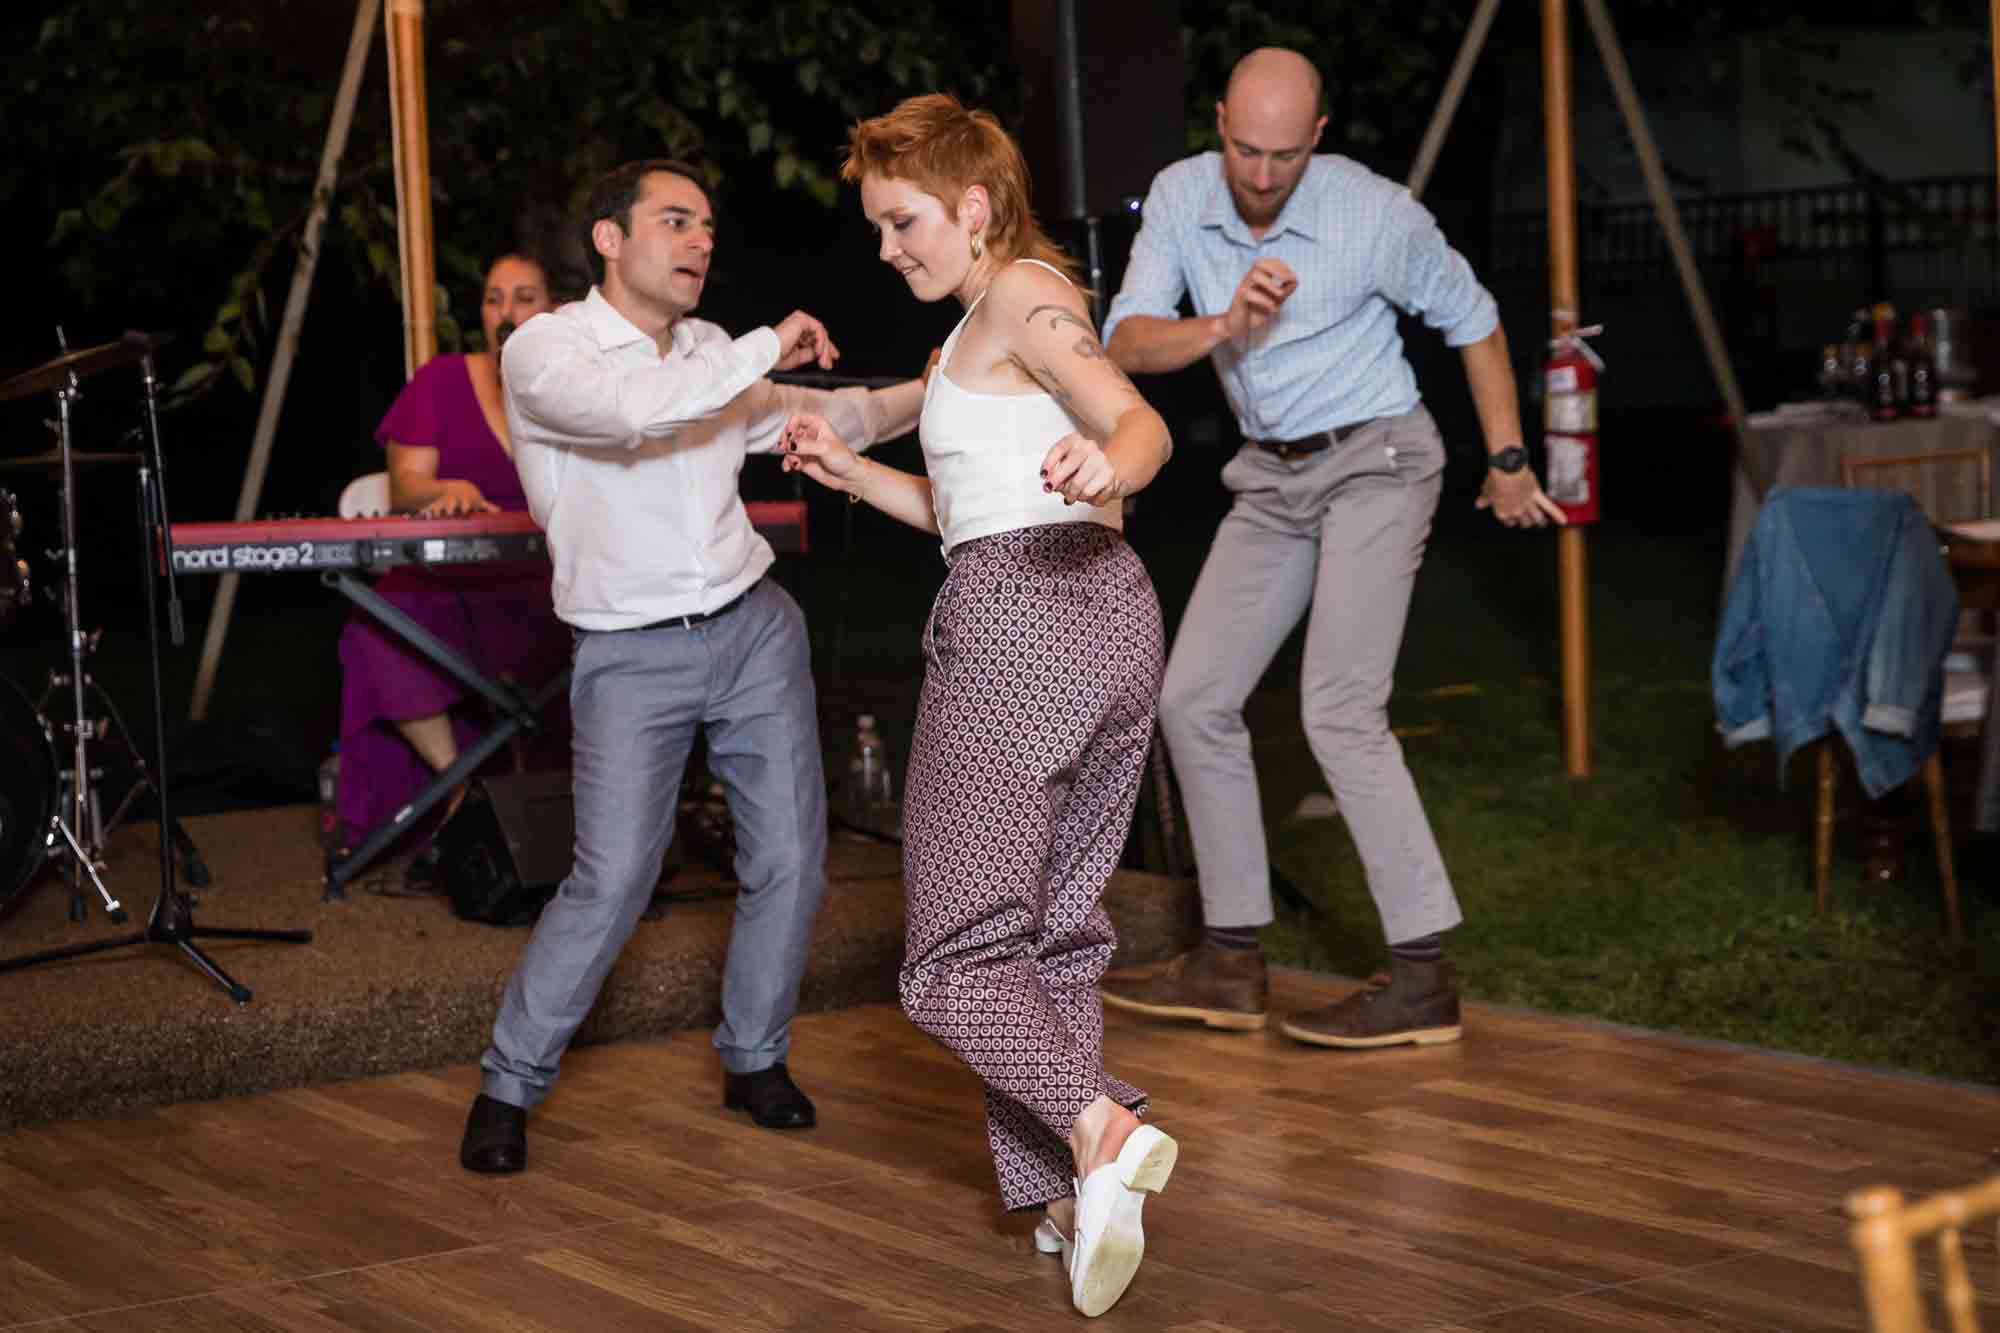 Two men and one woman dancing on dance floor